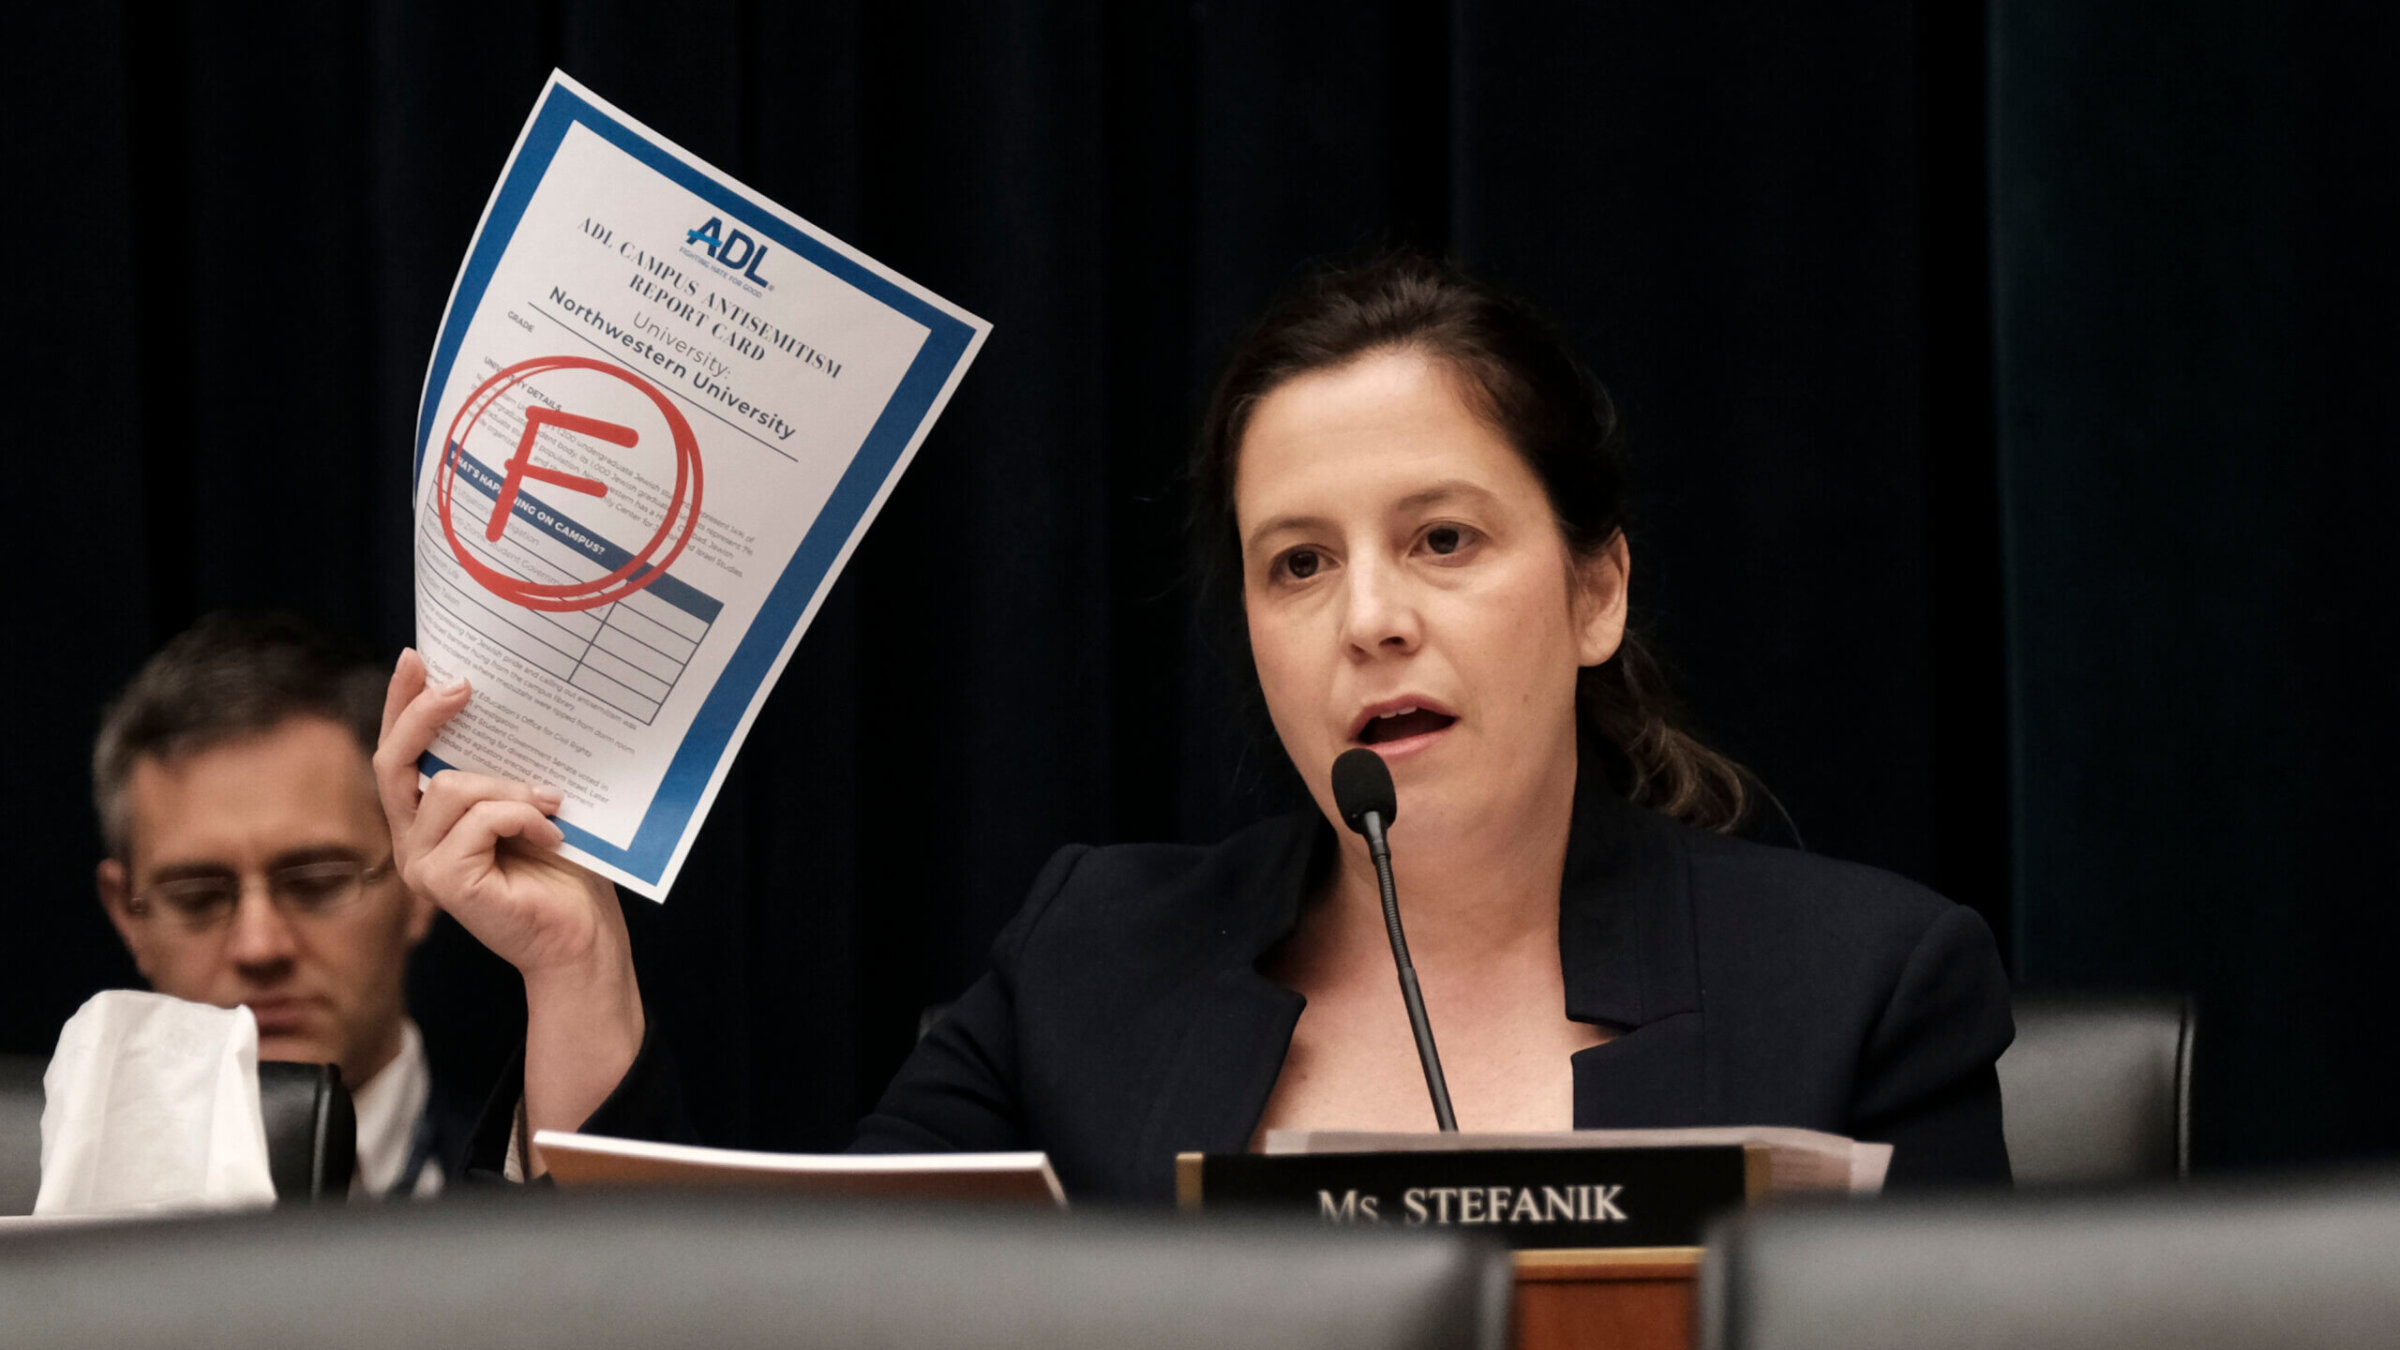 Rep. Elise Stefanik (R-N.Y.) displays the Anti-Defamation League's report card for Northwestern as the presidents of that school, Rutgers and UCLA testify at a hearing called "Calling for Accountability: Stopping Antisemitic College Chaos" before the House Committee on Education and the Workforce May 23.